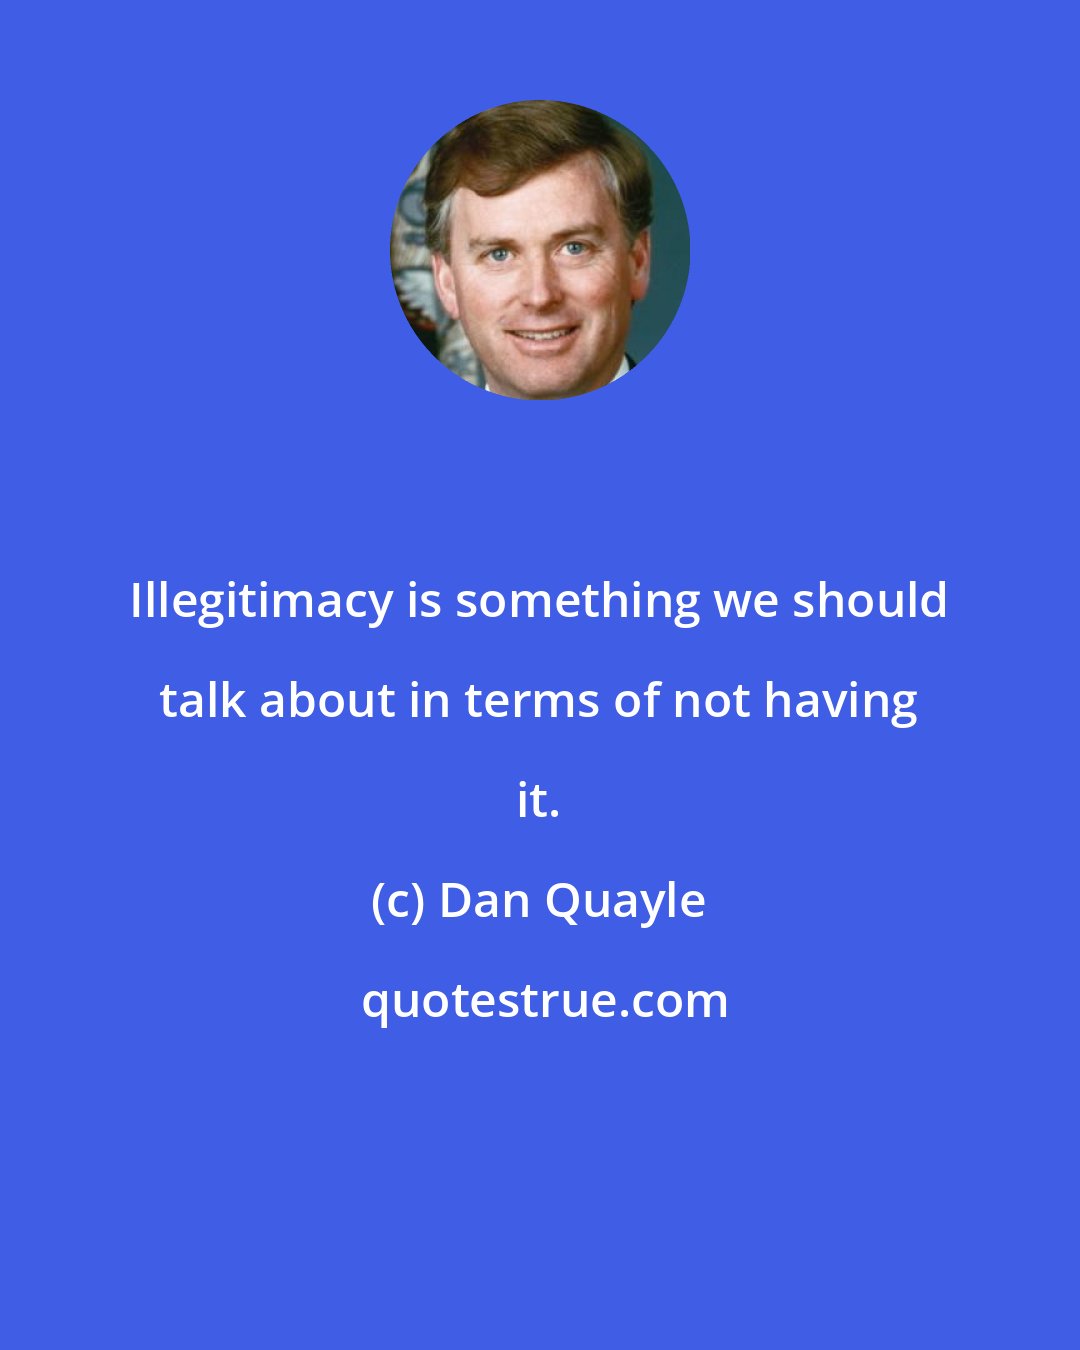 Dan Quayle: Illegitimacy is something we should talk about in terms of not having it.